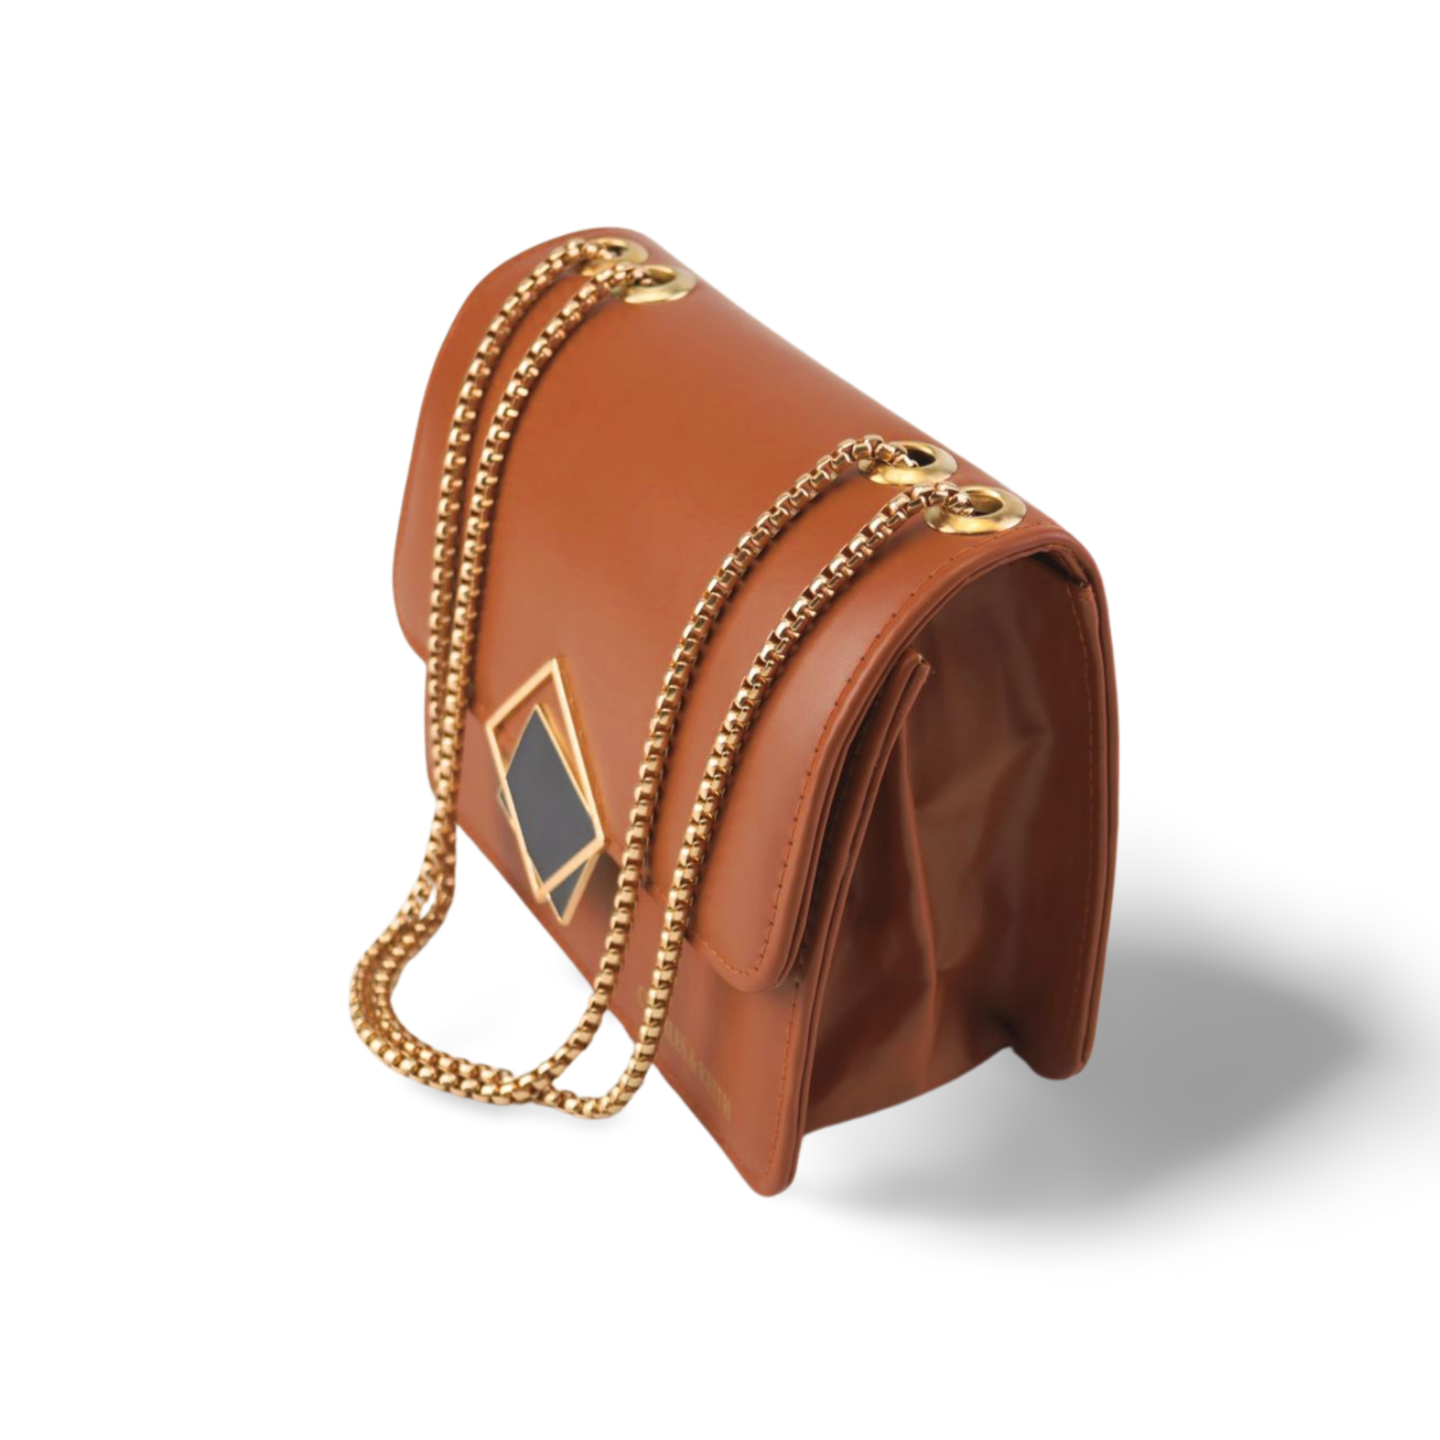 Latest fashion Crossbody Bag with Gold Chain and Square Buckle